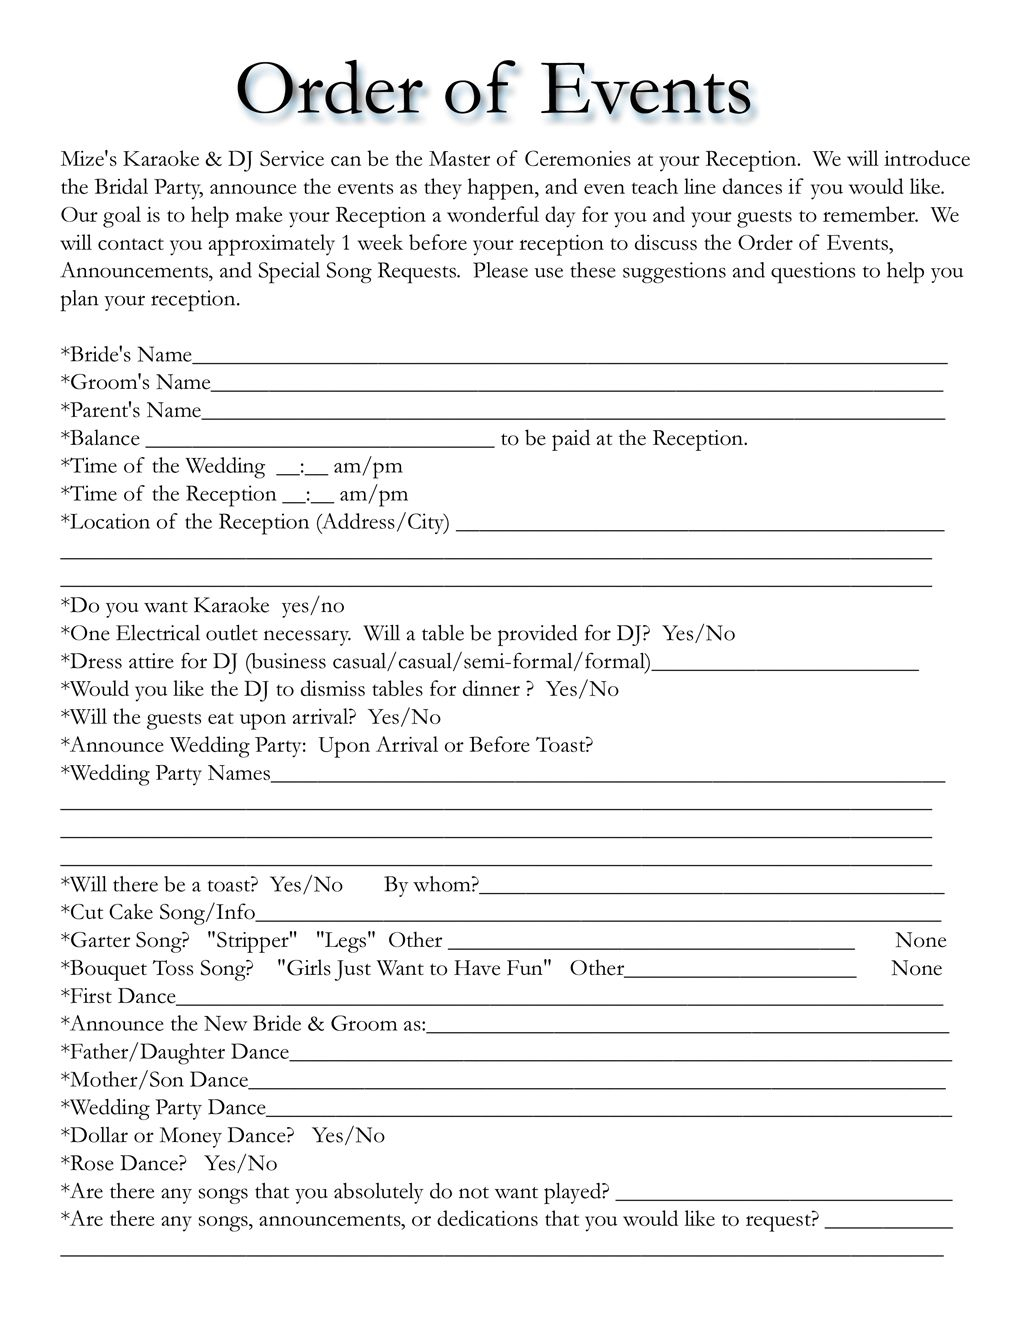 Wedding Itinerary Templates Free | Wedding Template | Projects To - Free Printable Itinerary